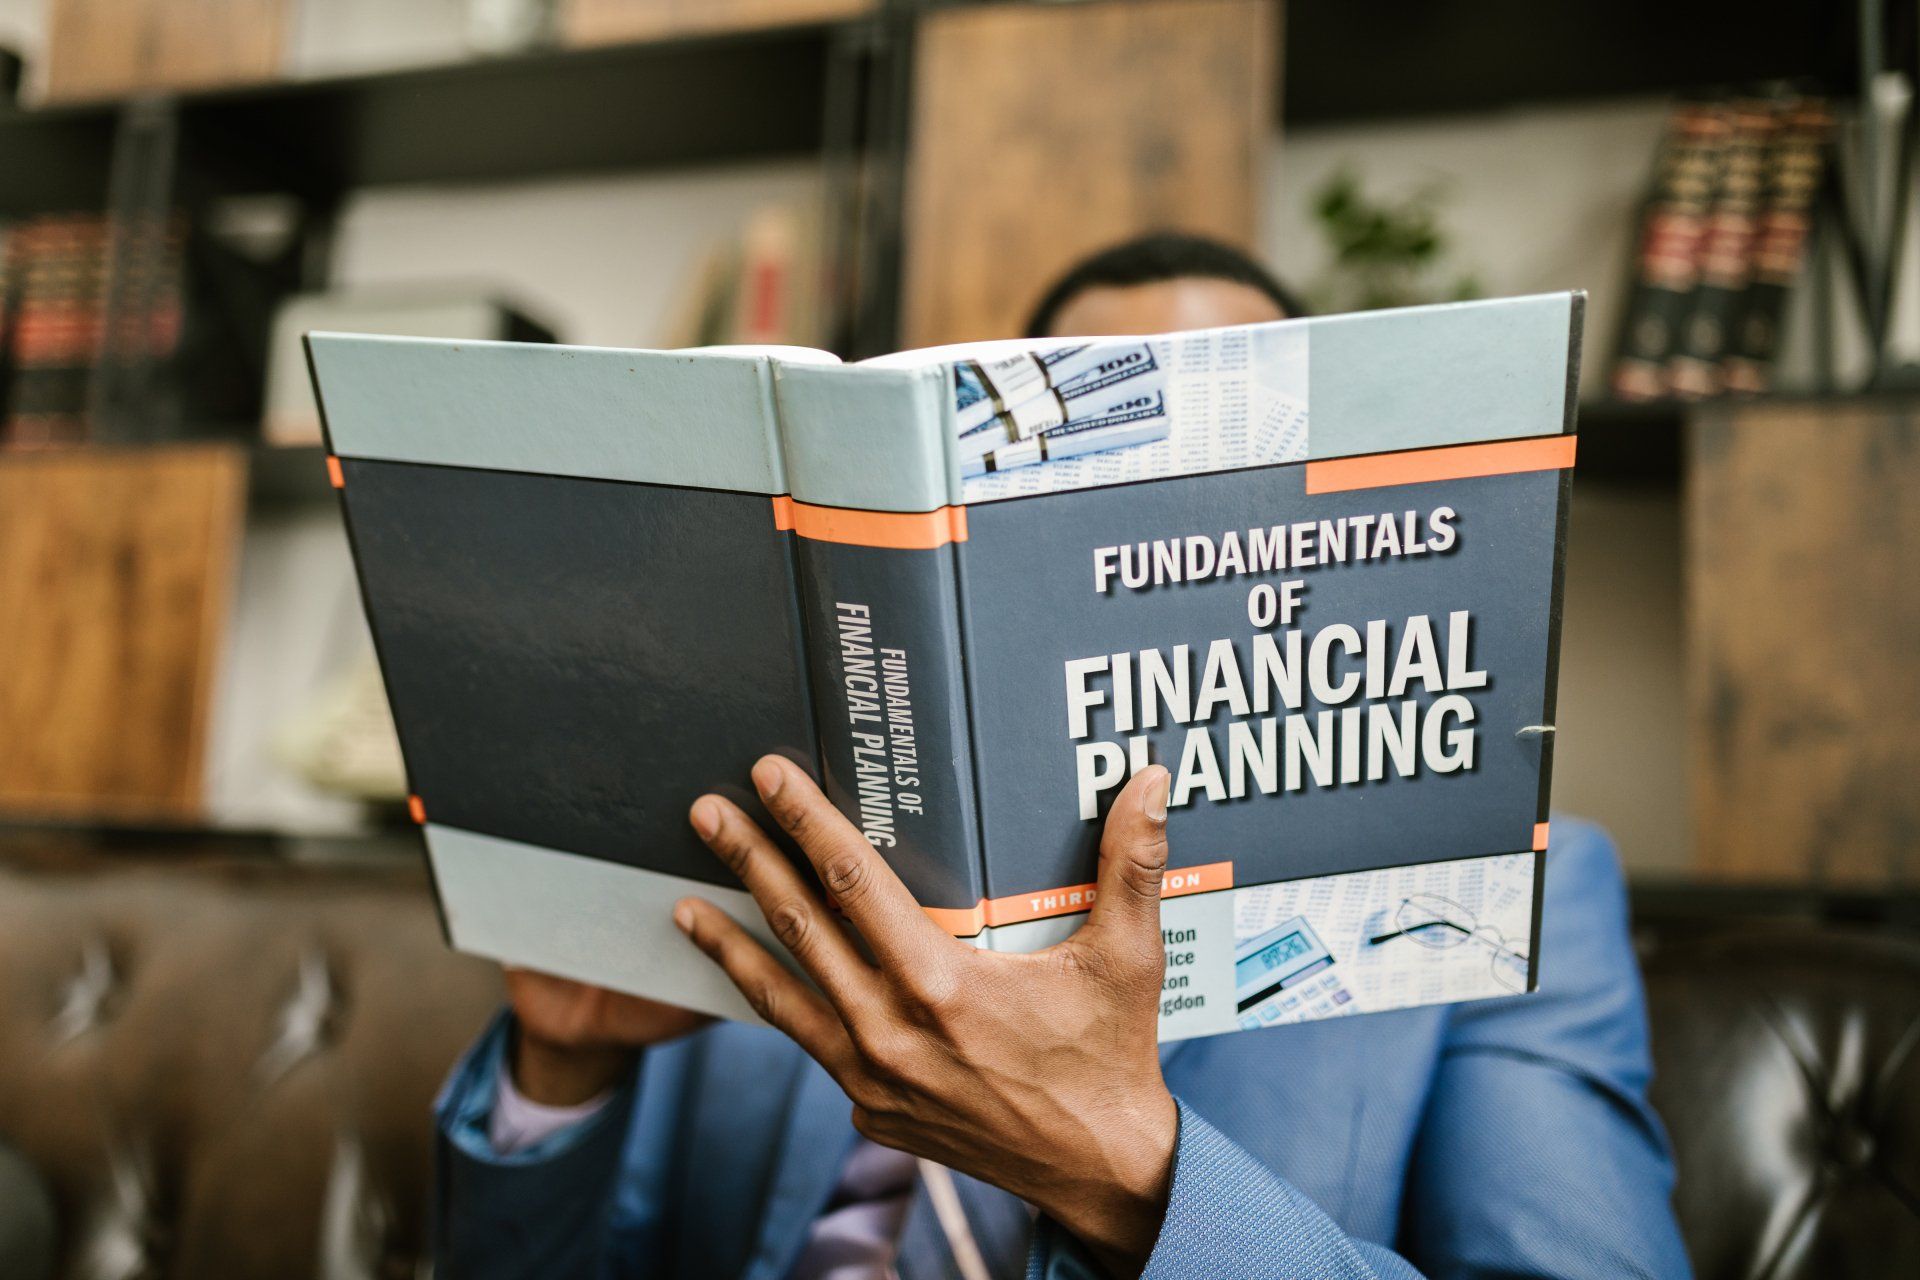 Choosing an accountant is important for financial planning